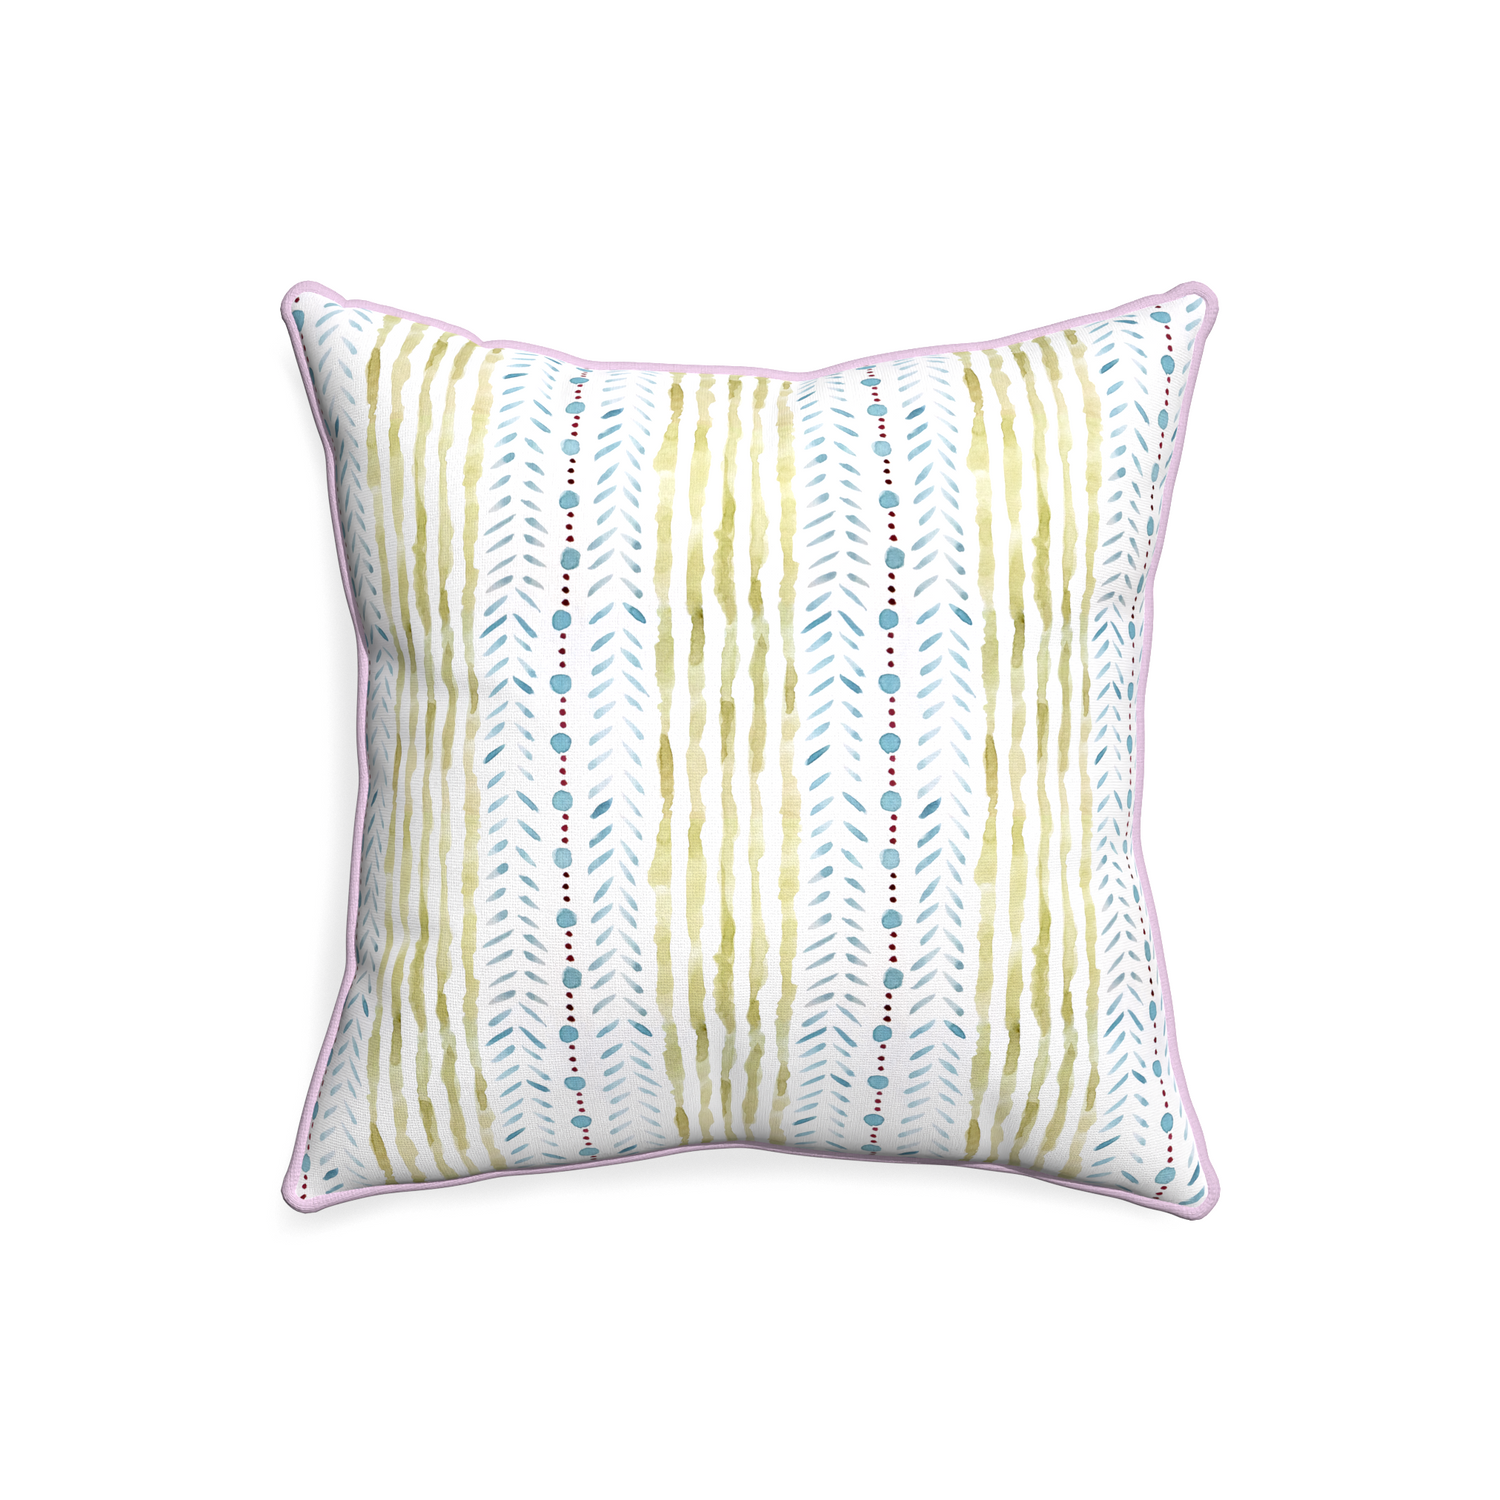 20-square julia custom blue & green stripedpillow with l piping on white background